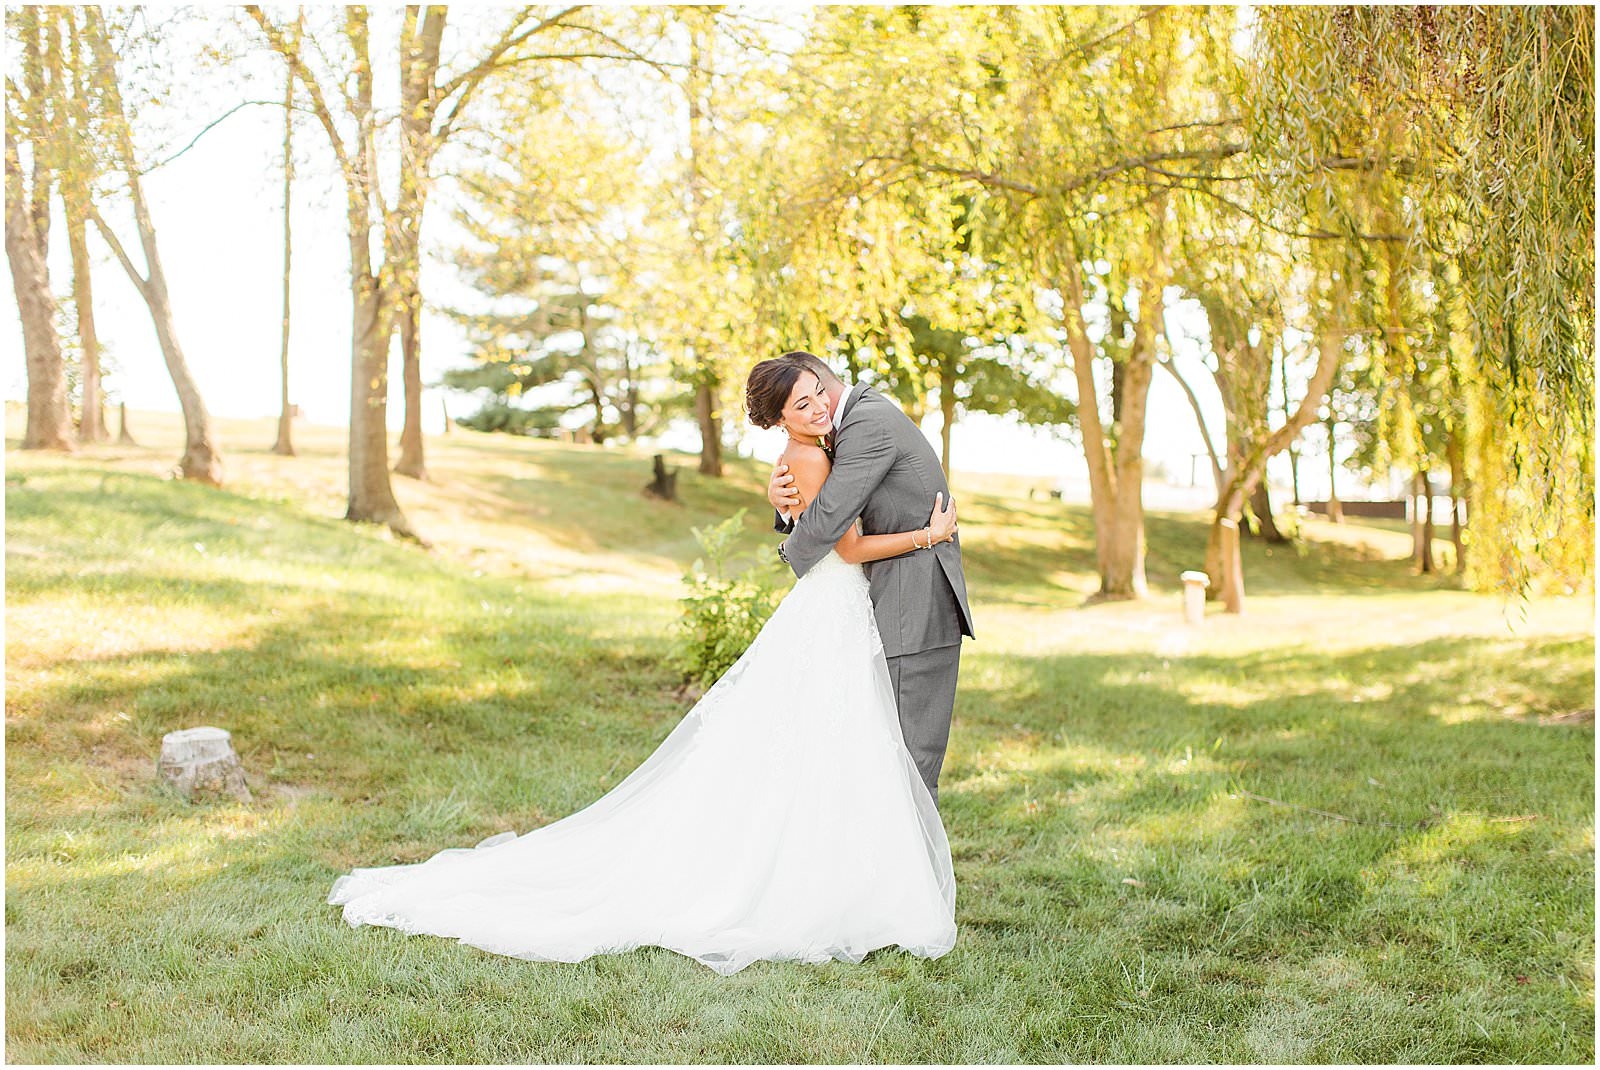 A Stunning Fall Wedding in Indianapolis, IN |. Sally and Andrew | Bret and Brandie Photography 0051.jpg